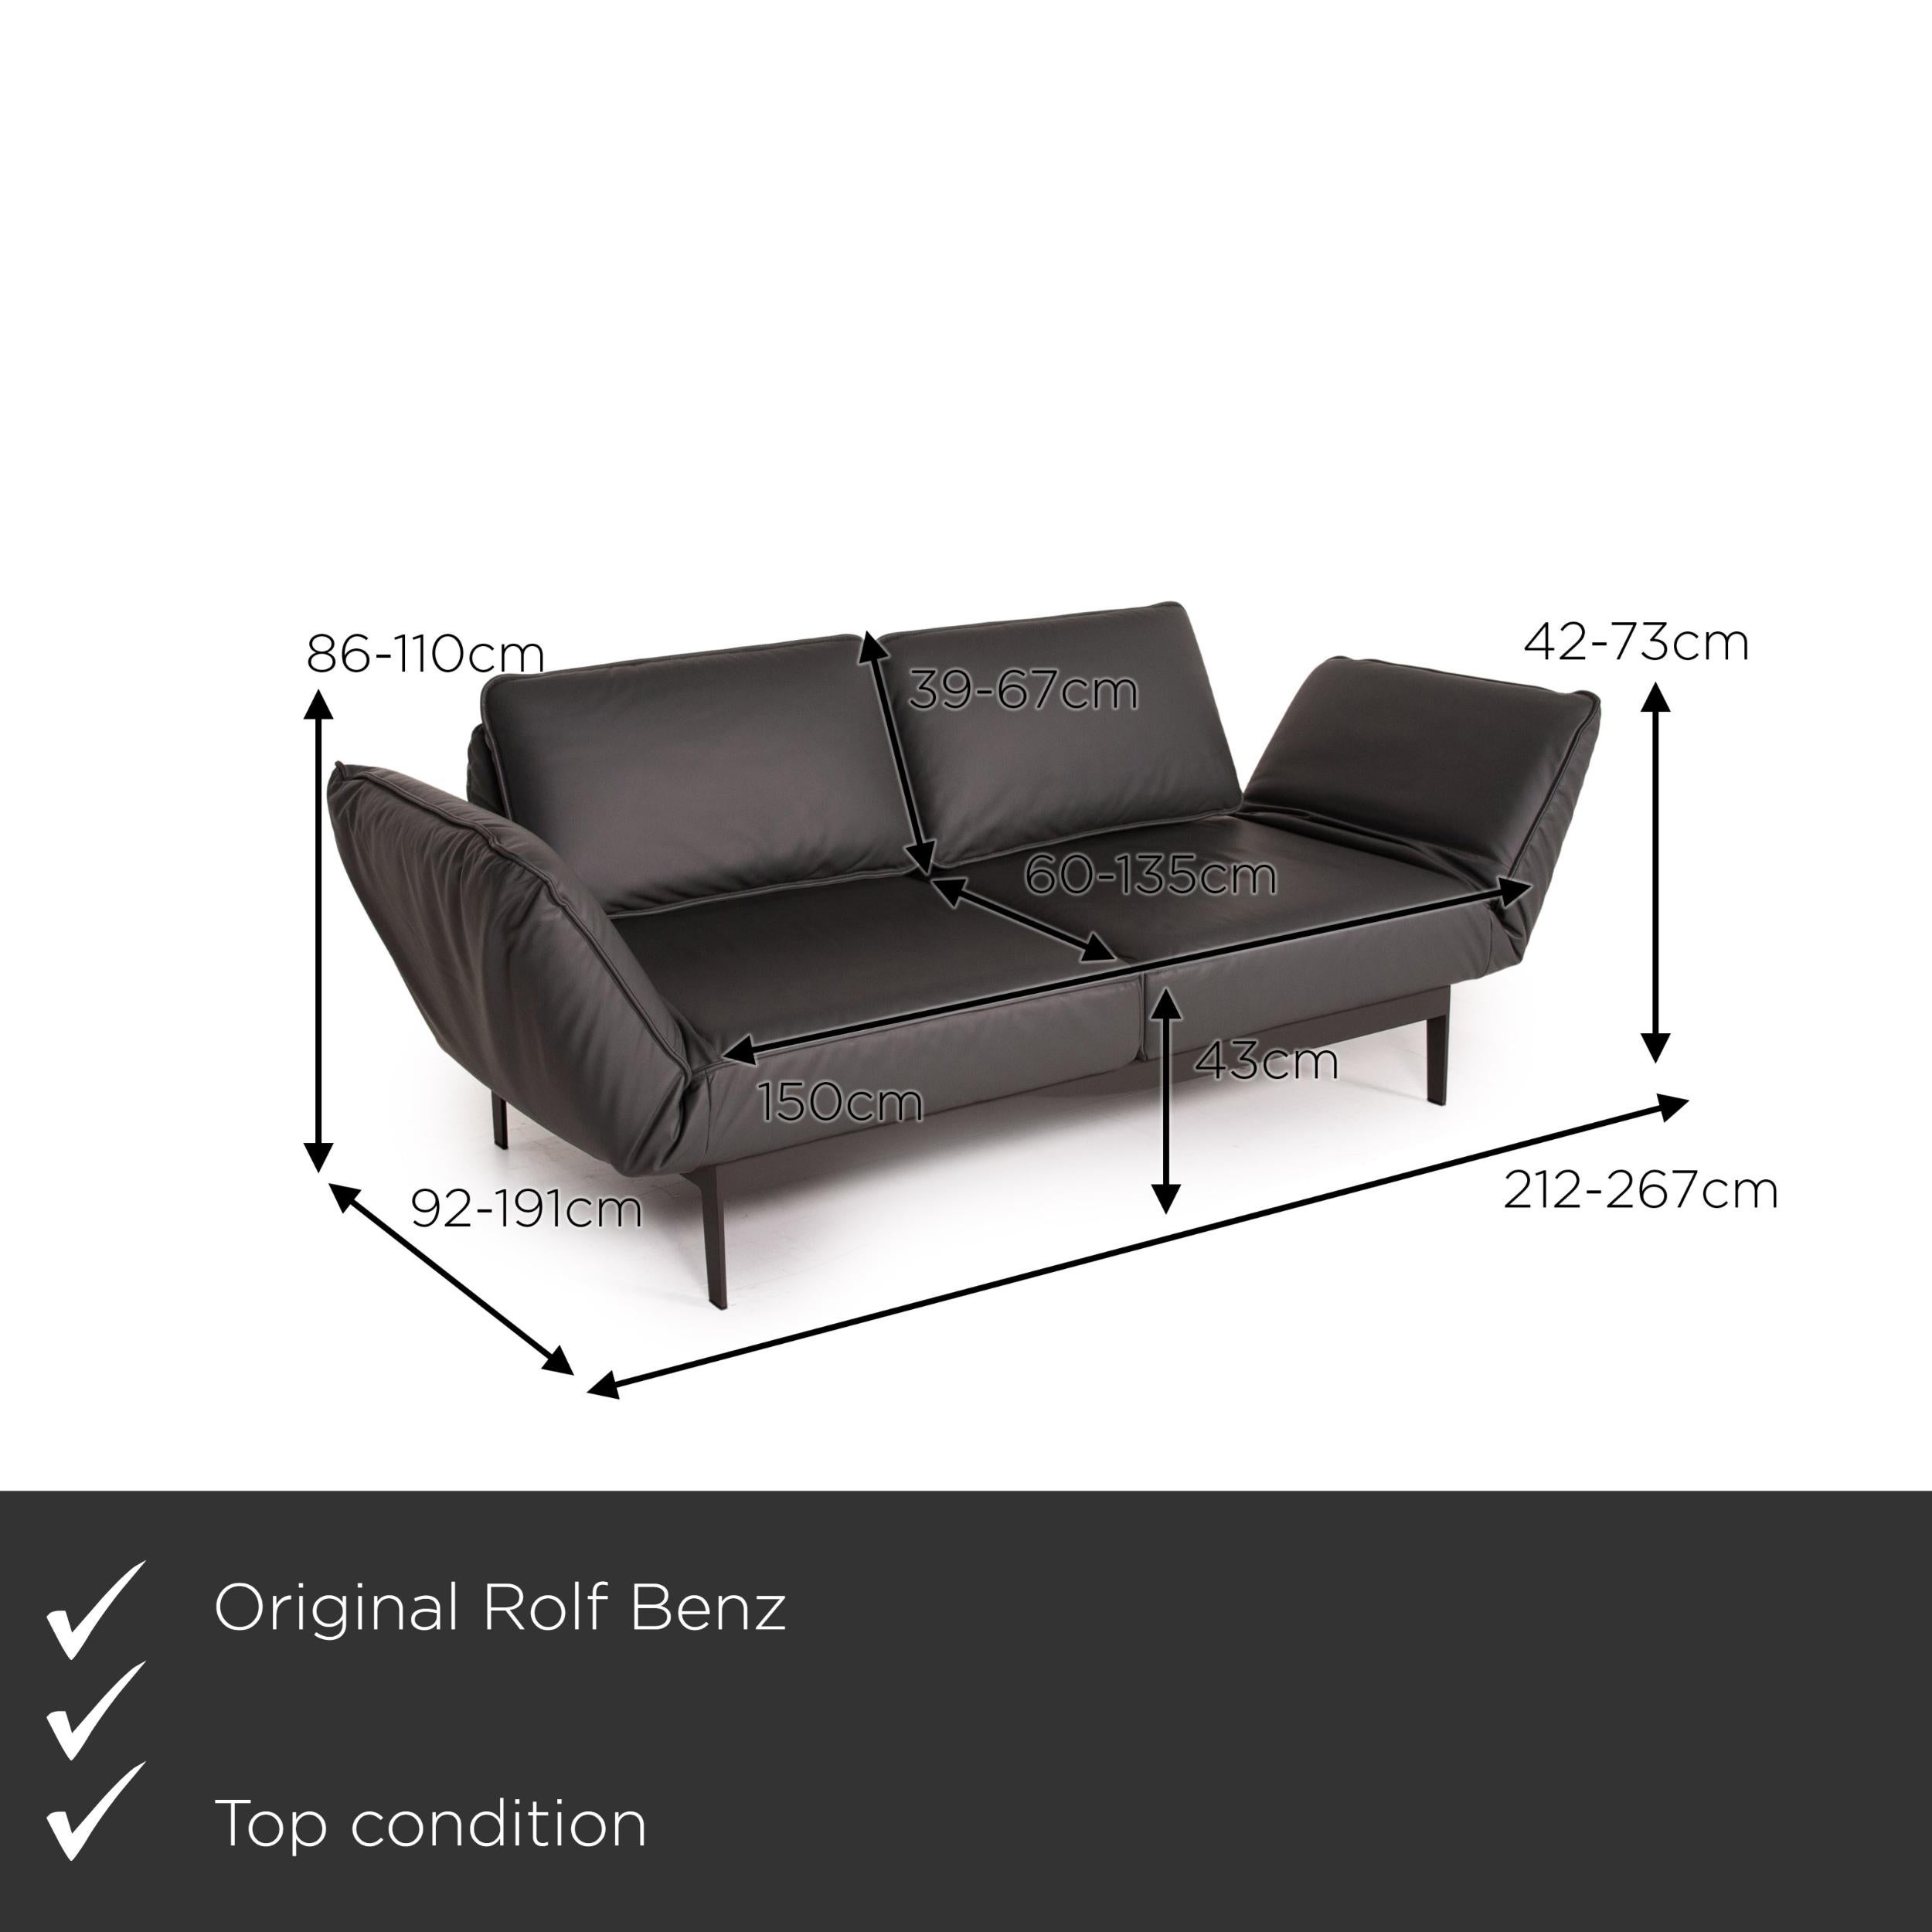 We present to you a Rolf Benz Mera leather sofa gray dark gray two-seater function relax function.


 Product measurements in centimeters:
 

Depth: 92
Width: 212
Height: 86
Seat height: 43
Rest height: 42
Seat depth: 60
Seat width: